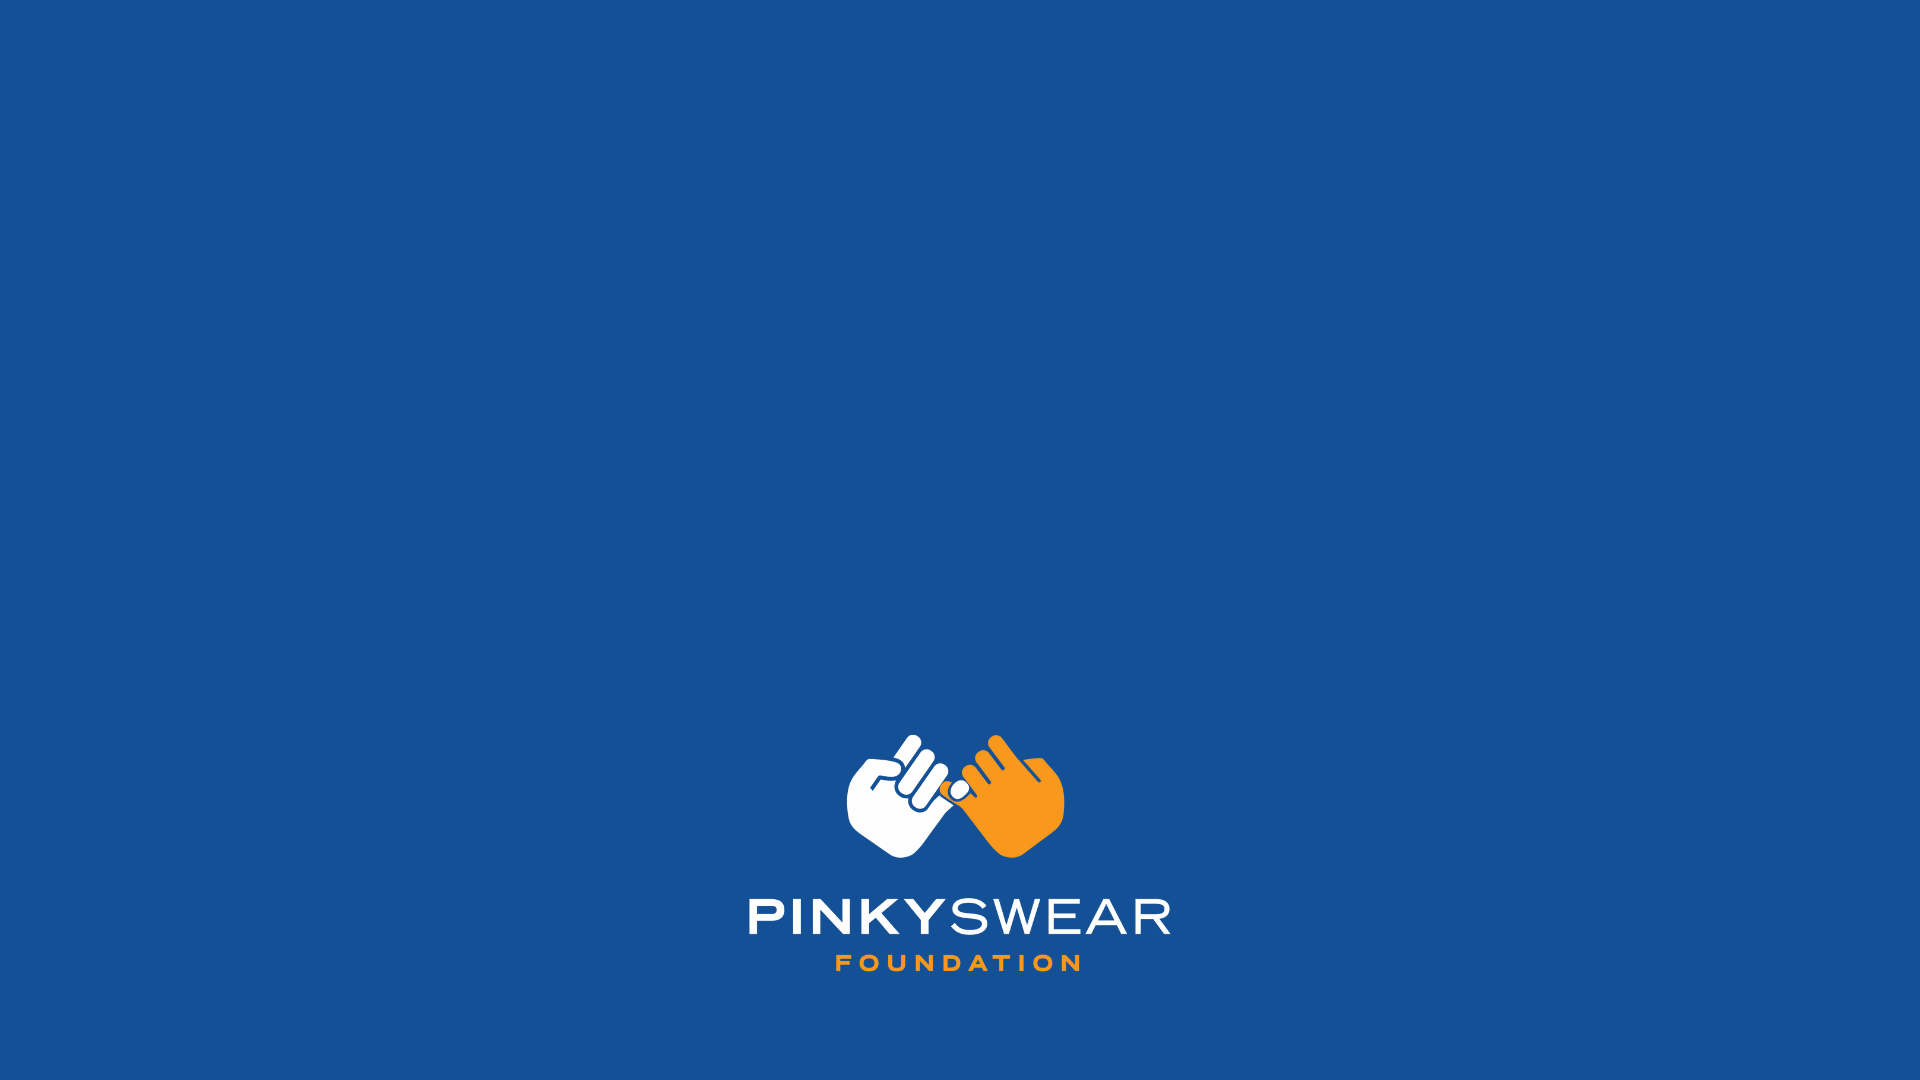 blue image with an orange and white Pinky Swear Foundation logo